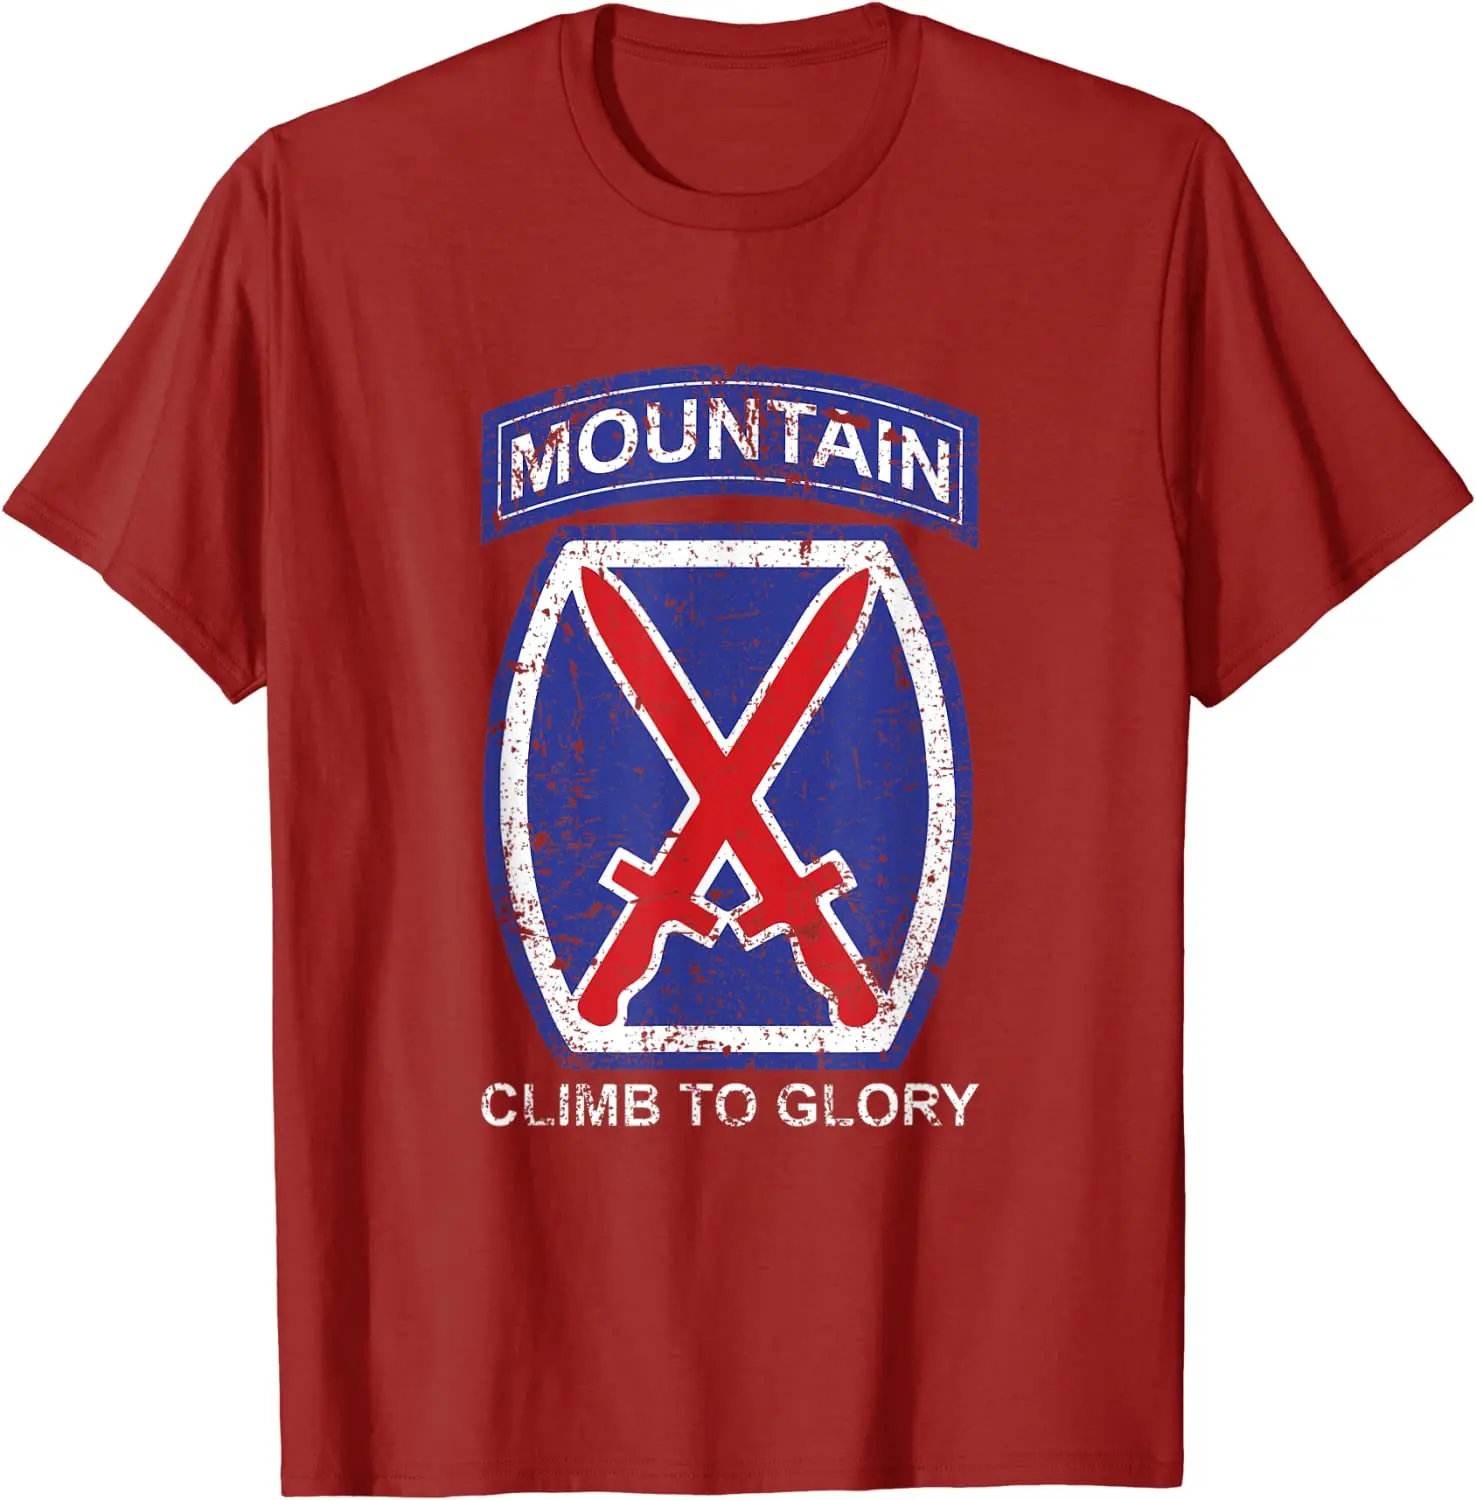 

10th Mountain Division Climb To Glory Men T-Shirt Short Sleeve Casual 100% Cotton O-Neck Summer TShirt Size S-3XL